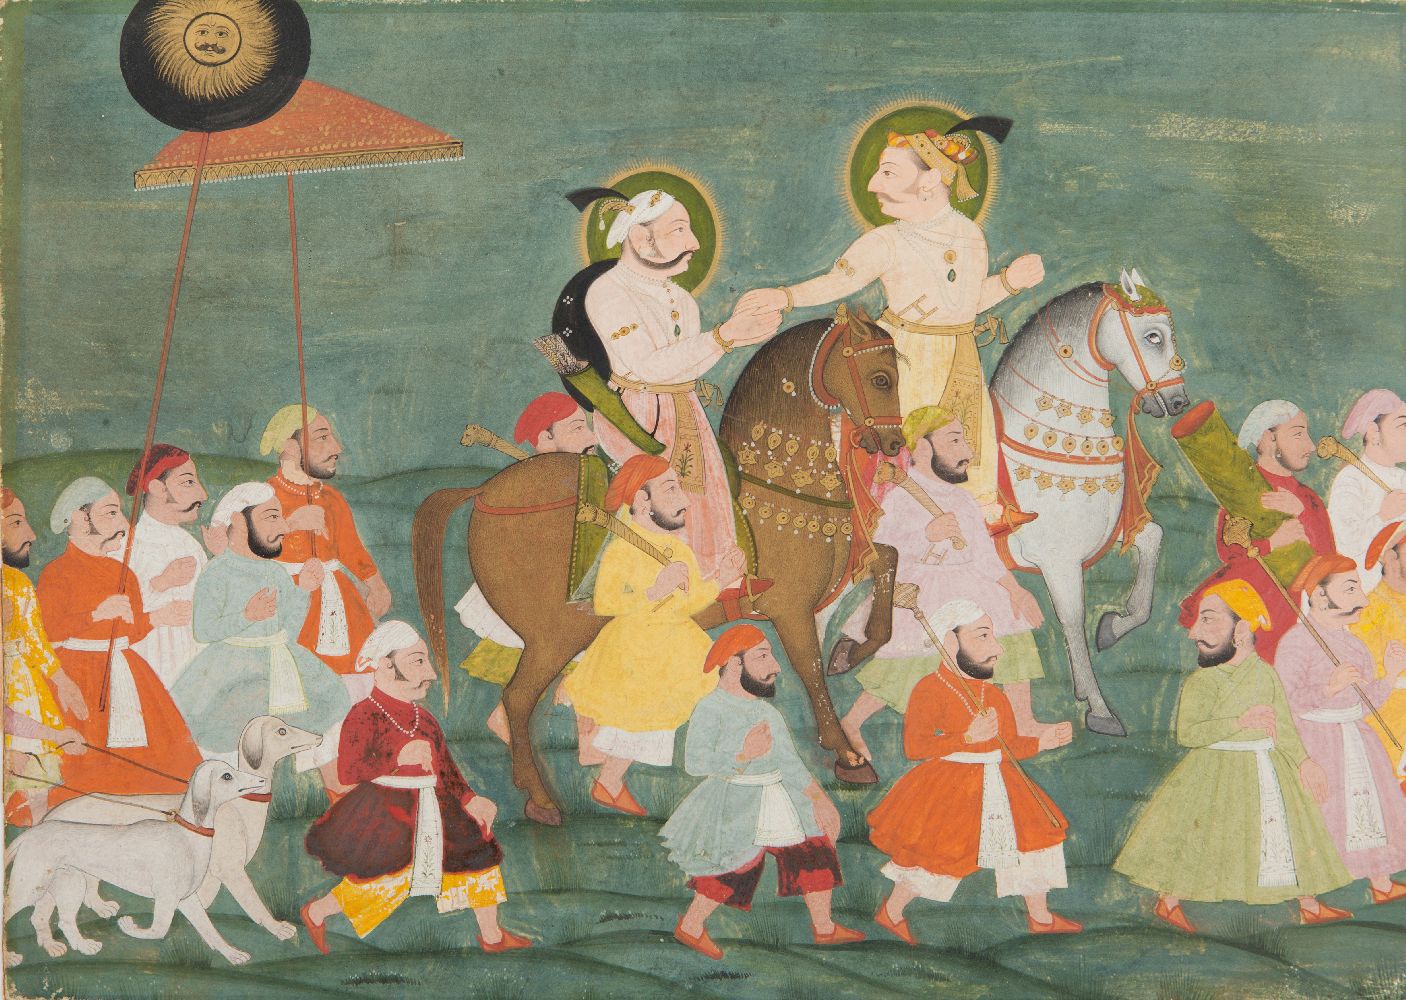 A hunting party of two rulers, possibly Maharaja Raj Singh (r. 1629-1680) and his father Jagar